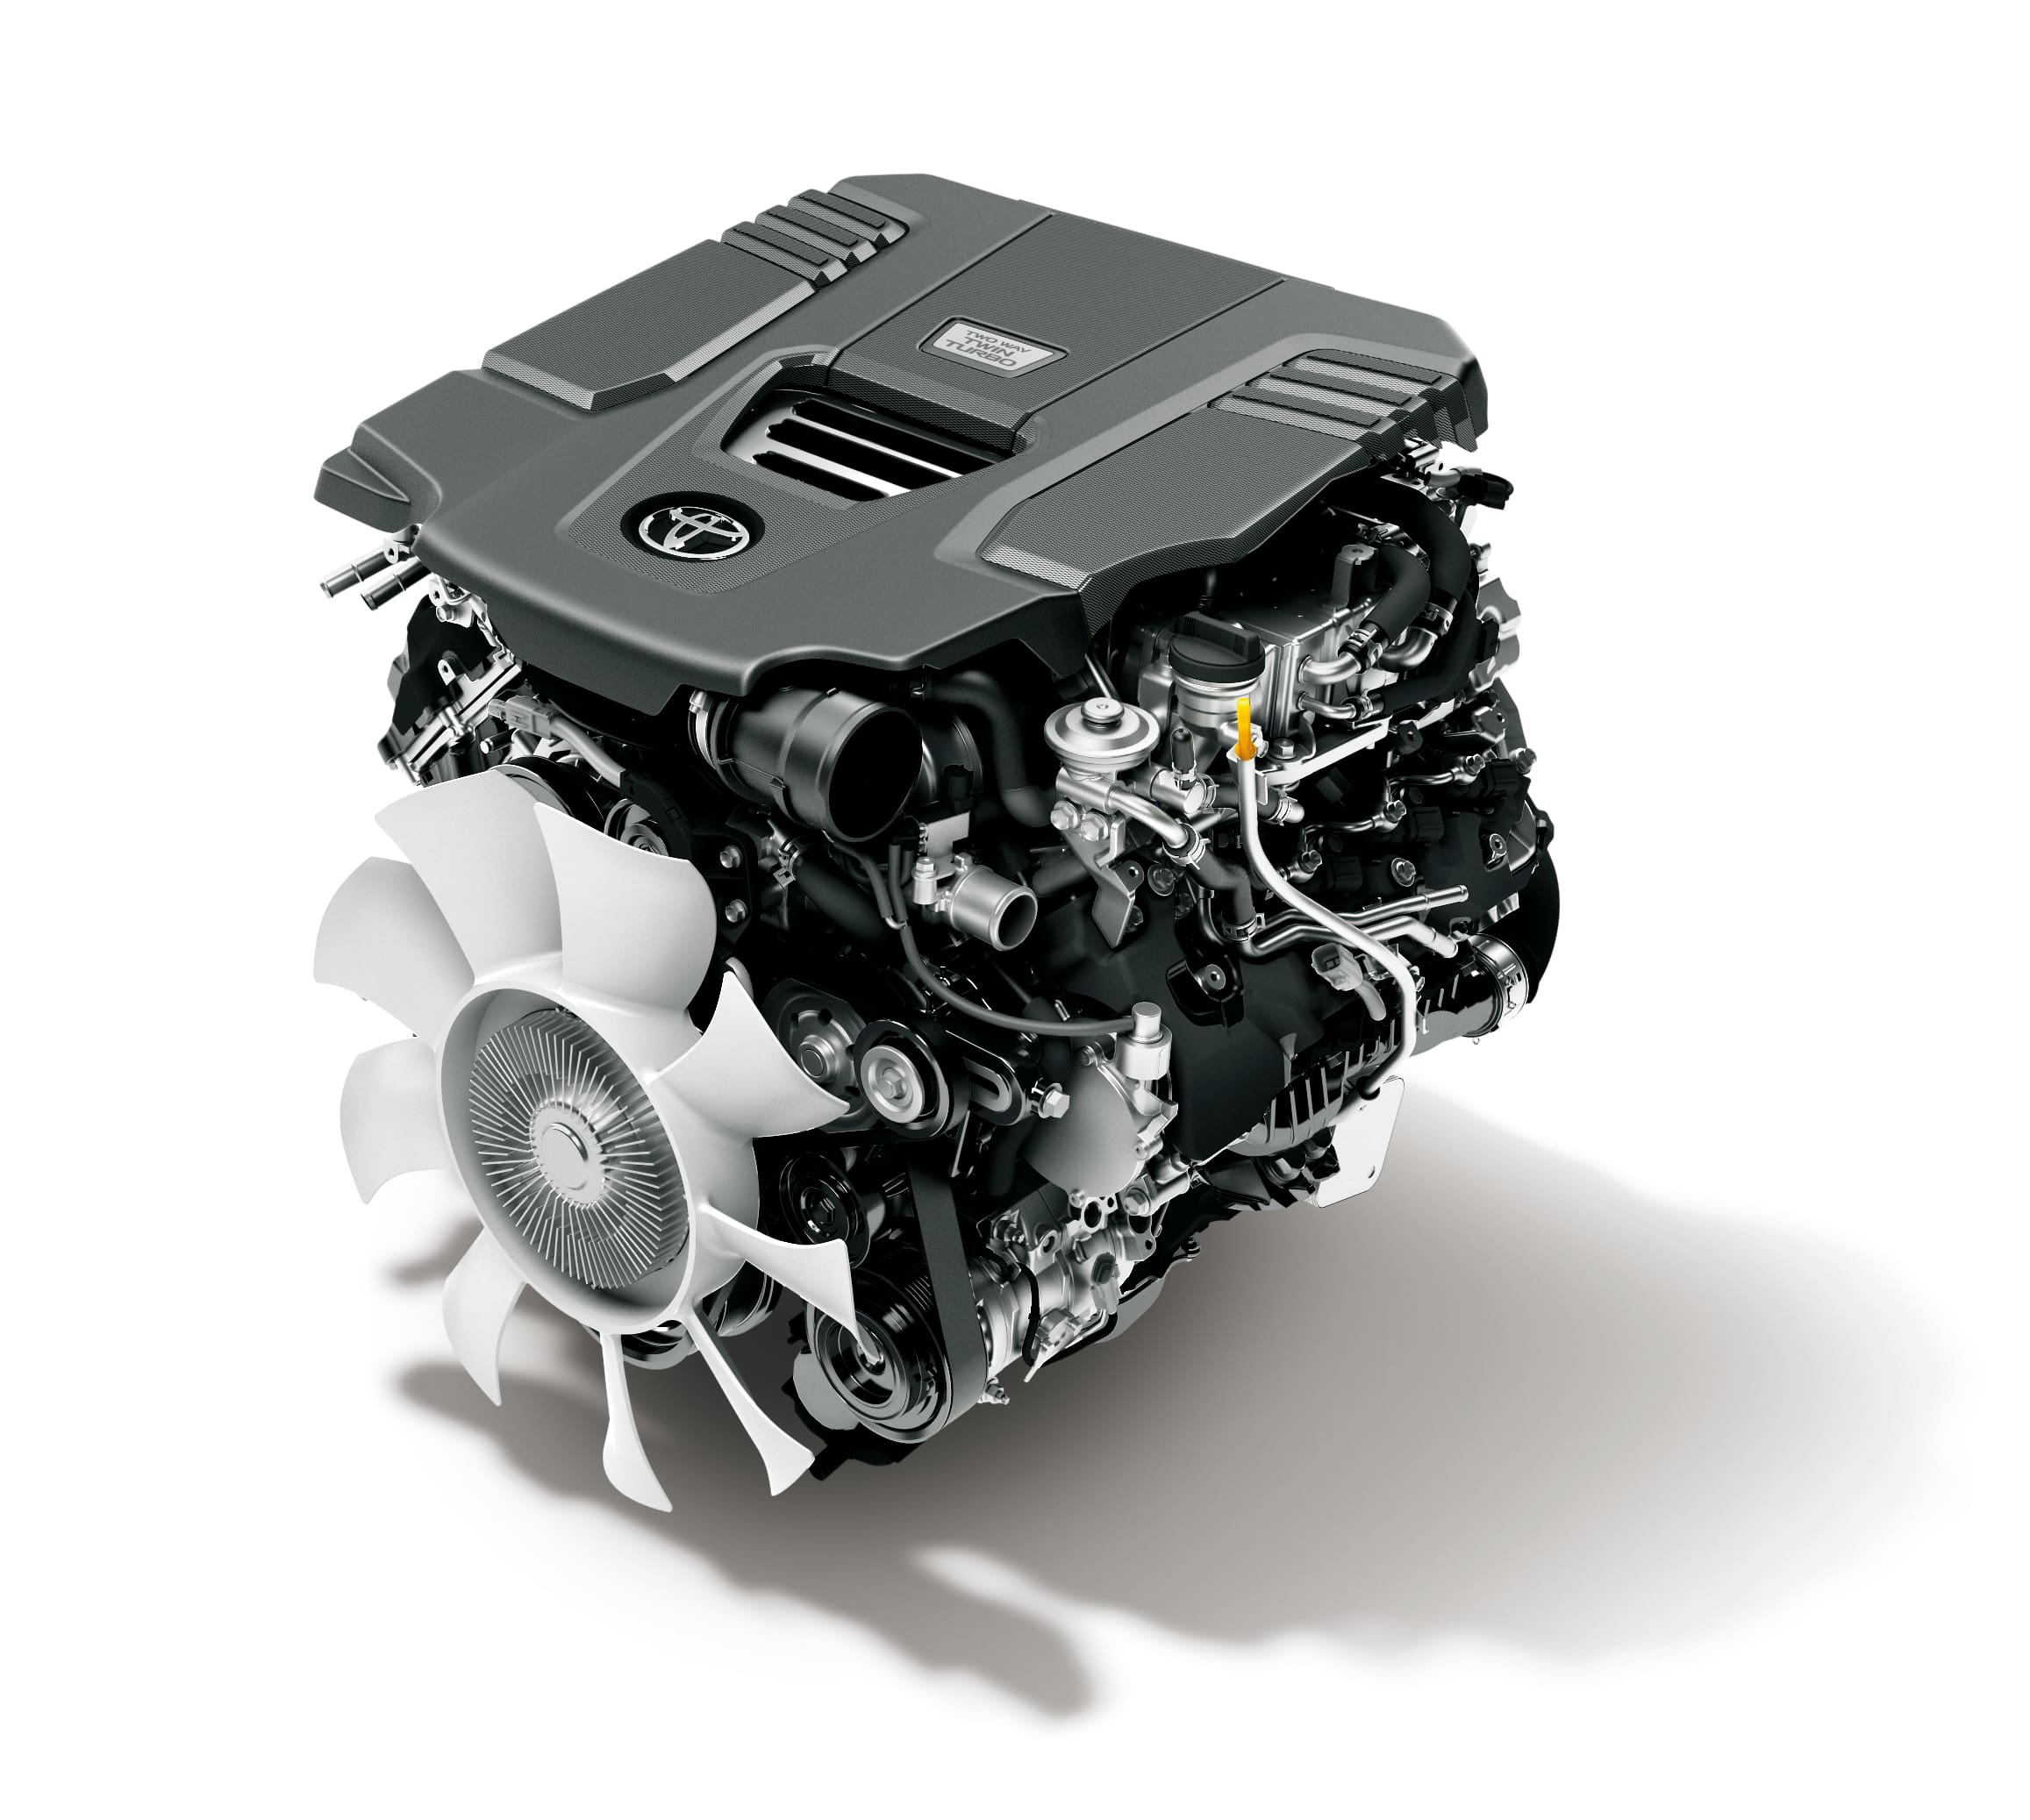 3.3L V6 twin-turbo diesel engine on the Land Cruiser 300